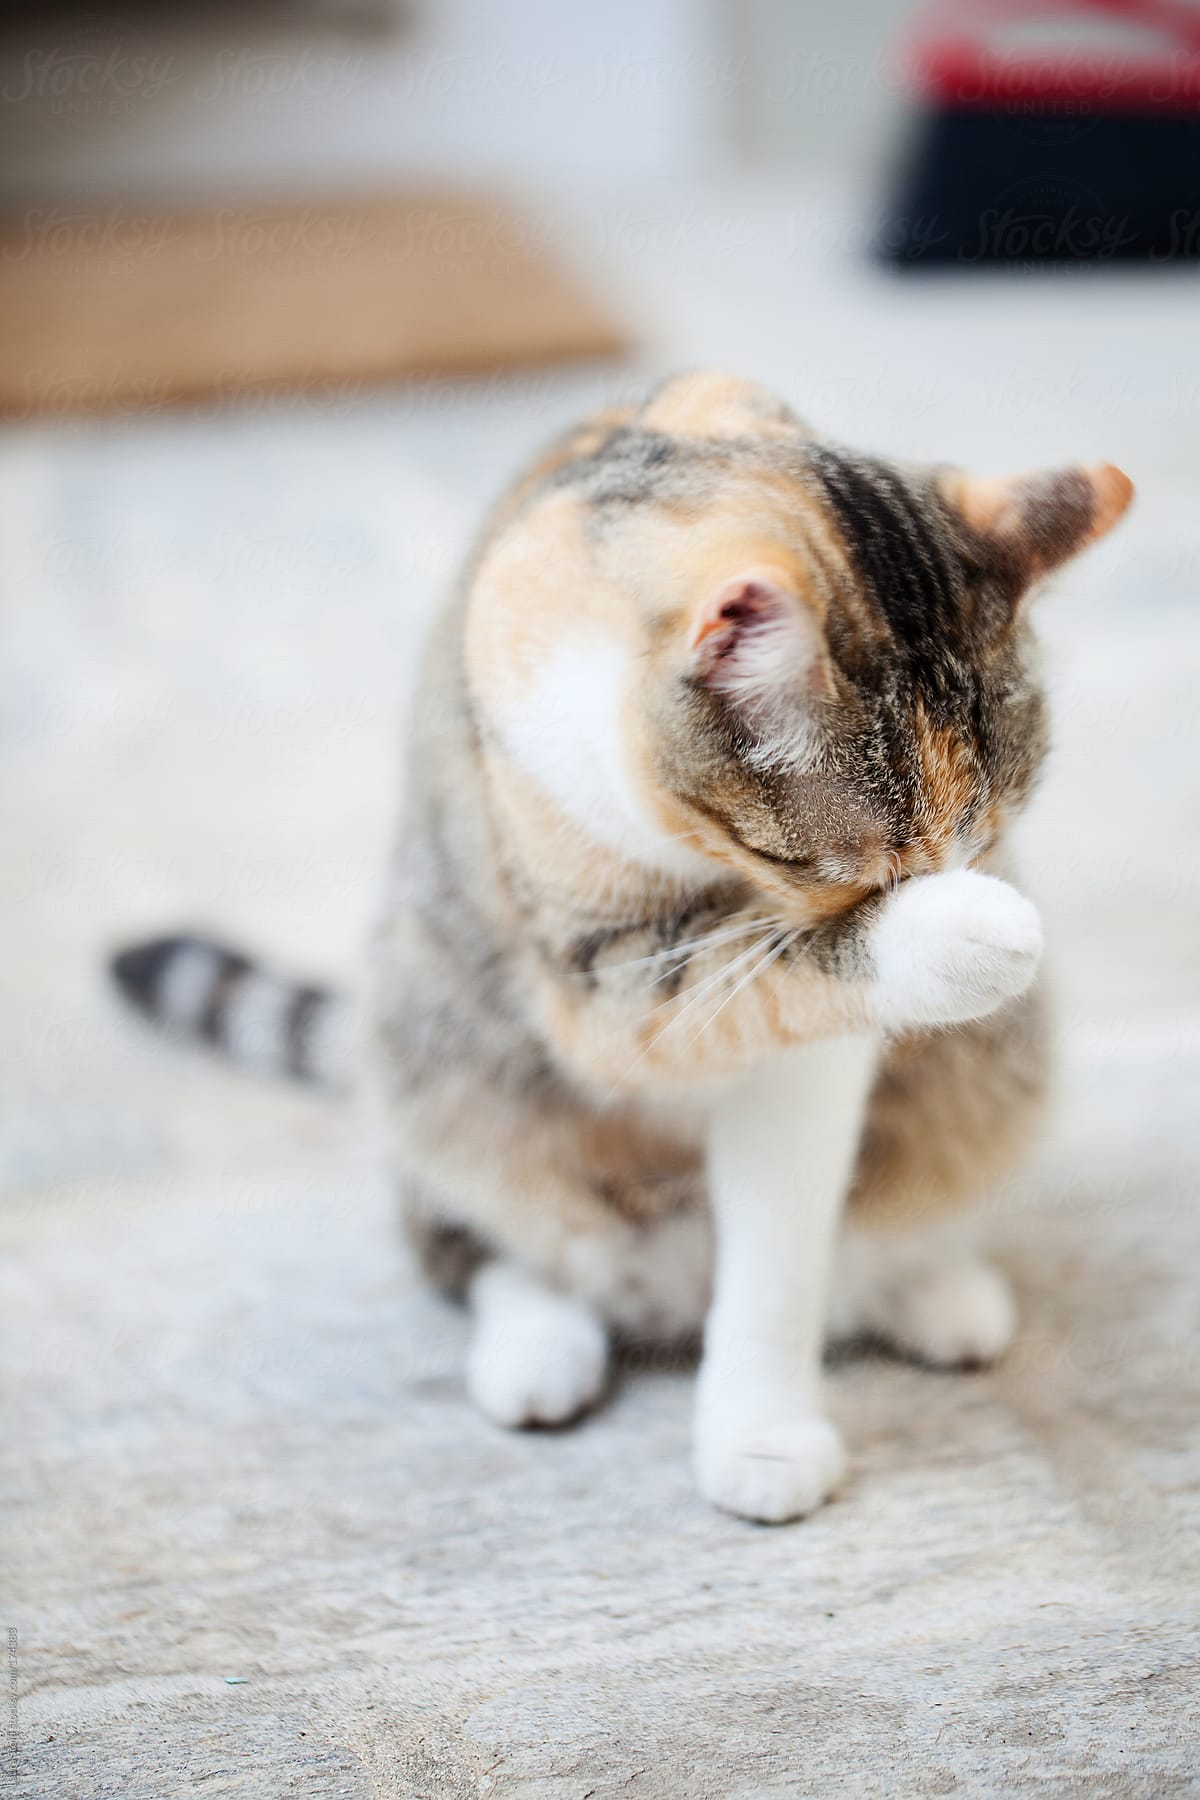 Cat cleaning her face with paw